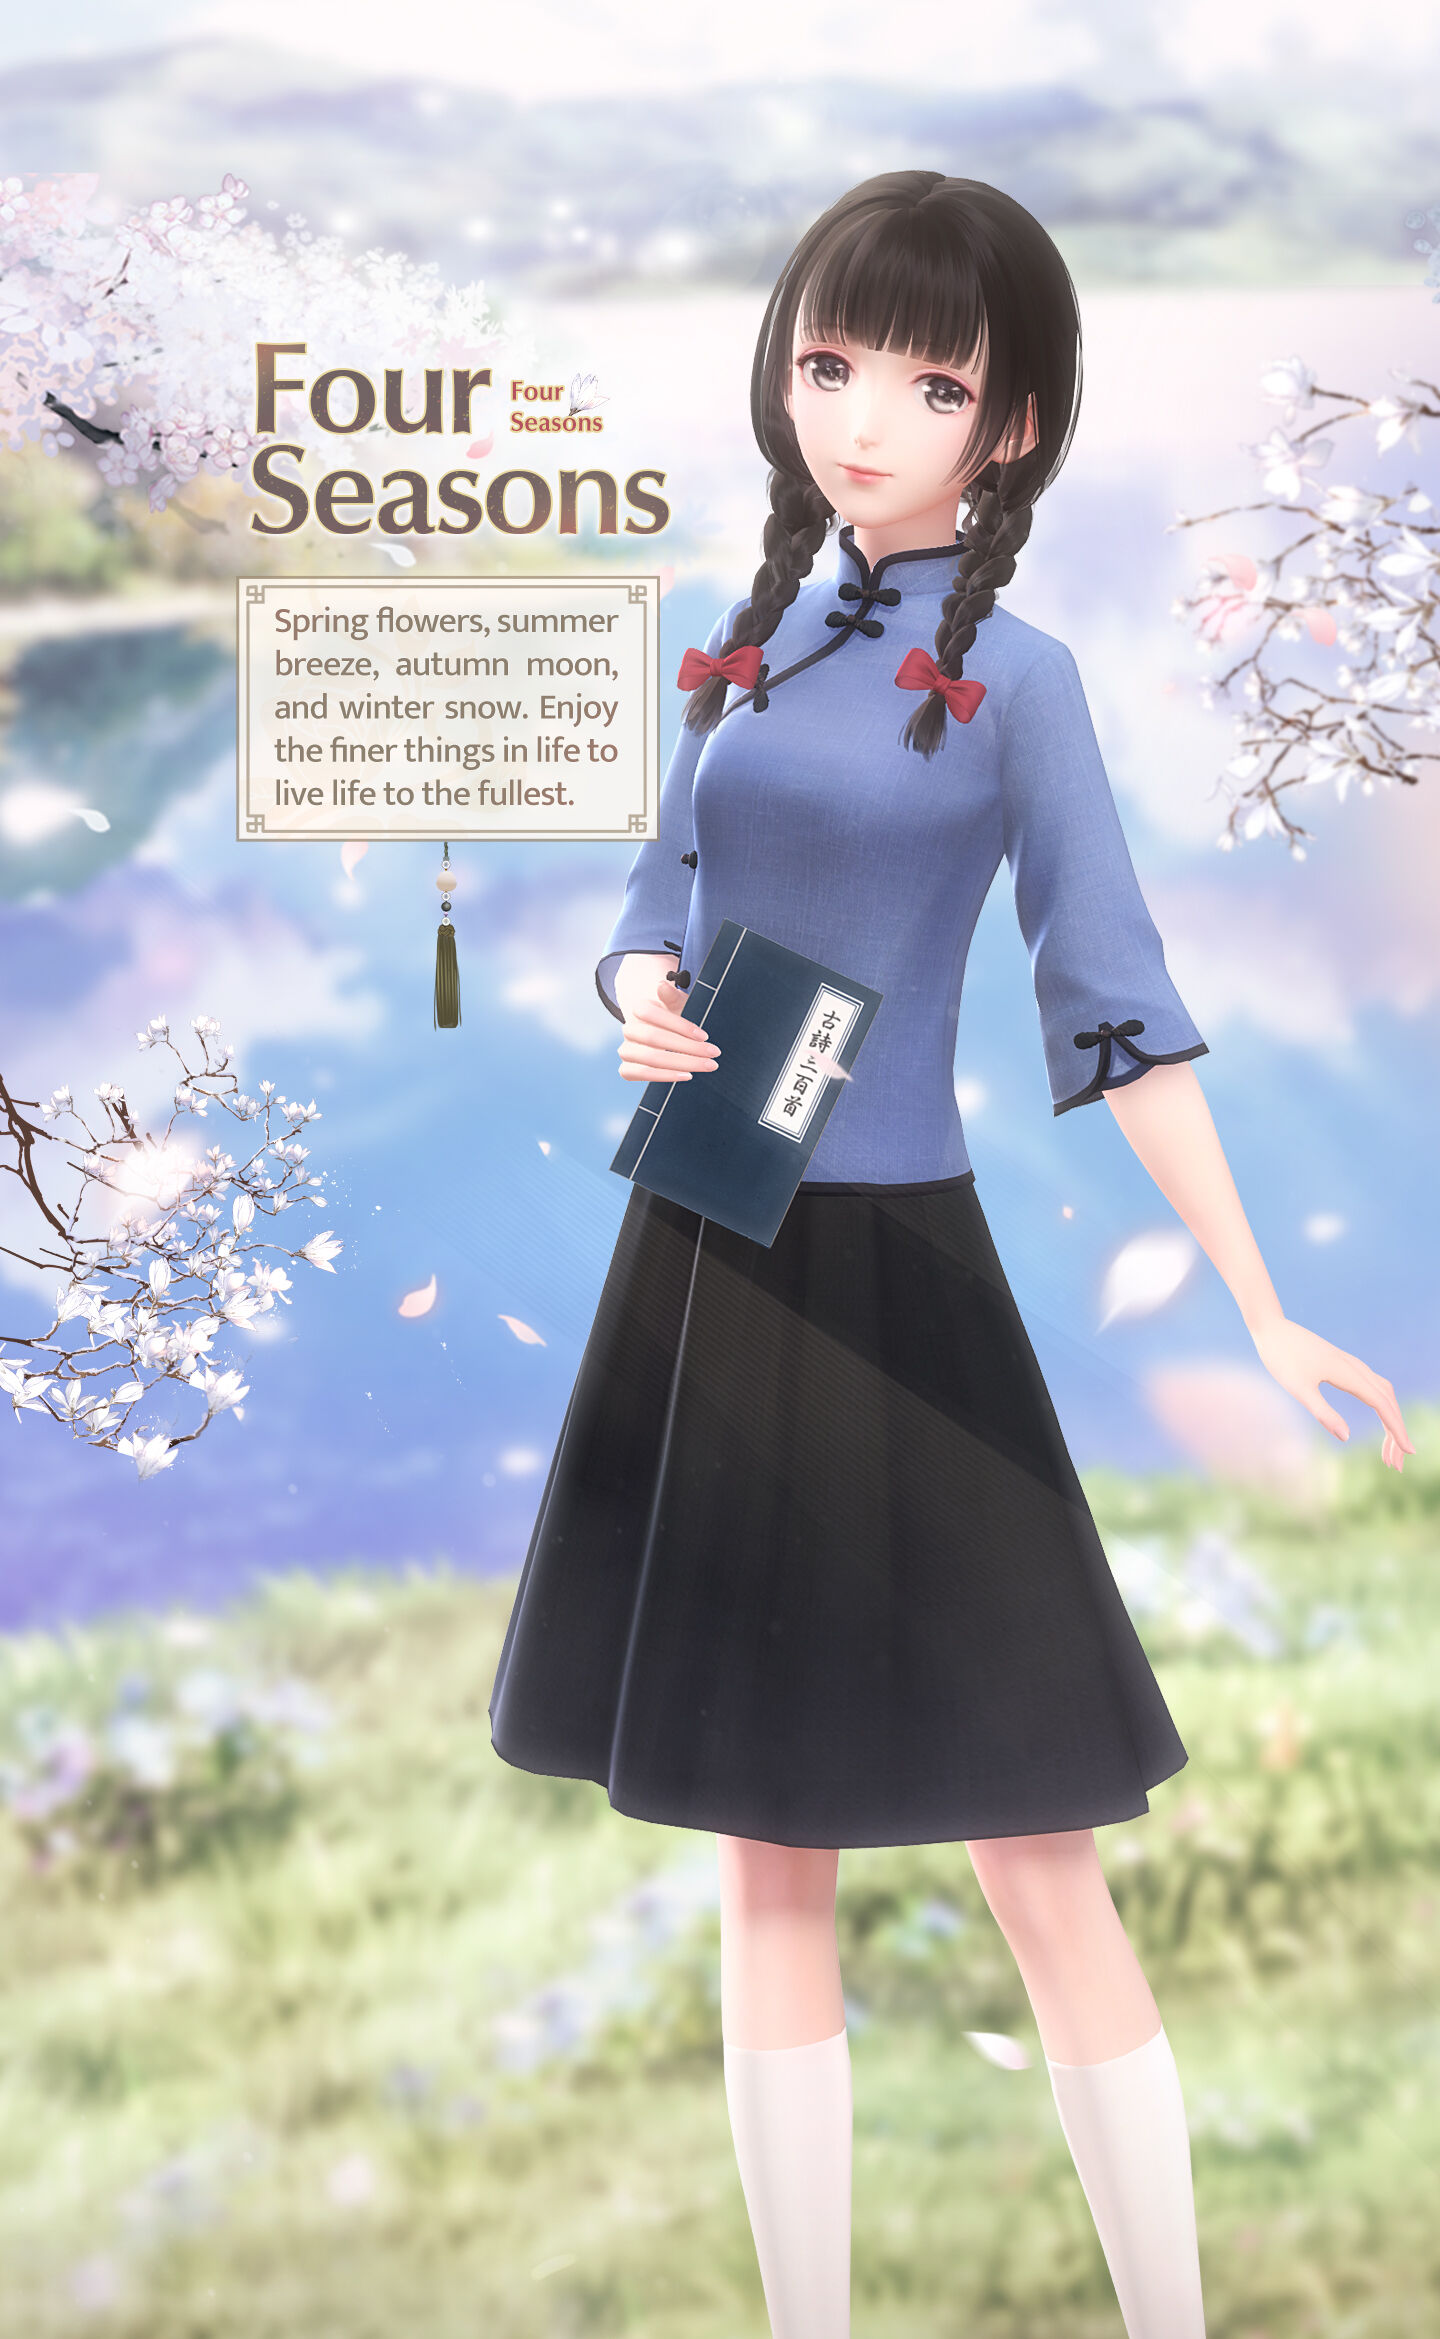 Seasons of a Woman's Life: Autumn, Winter, Spring, Summer : Life